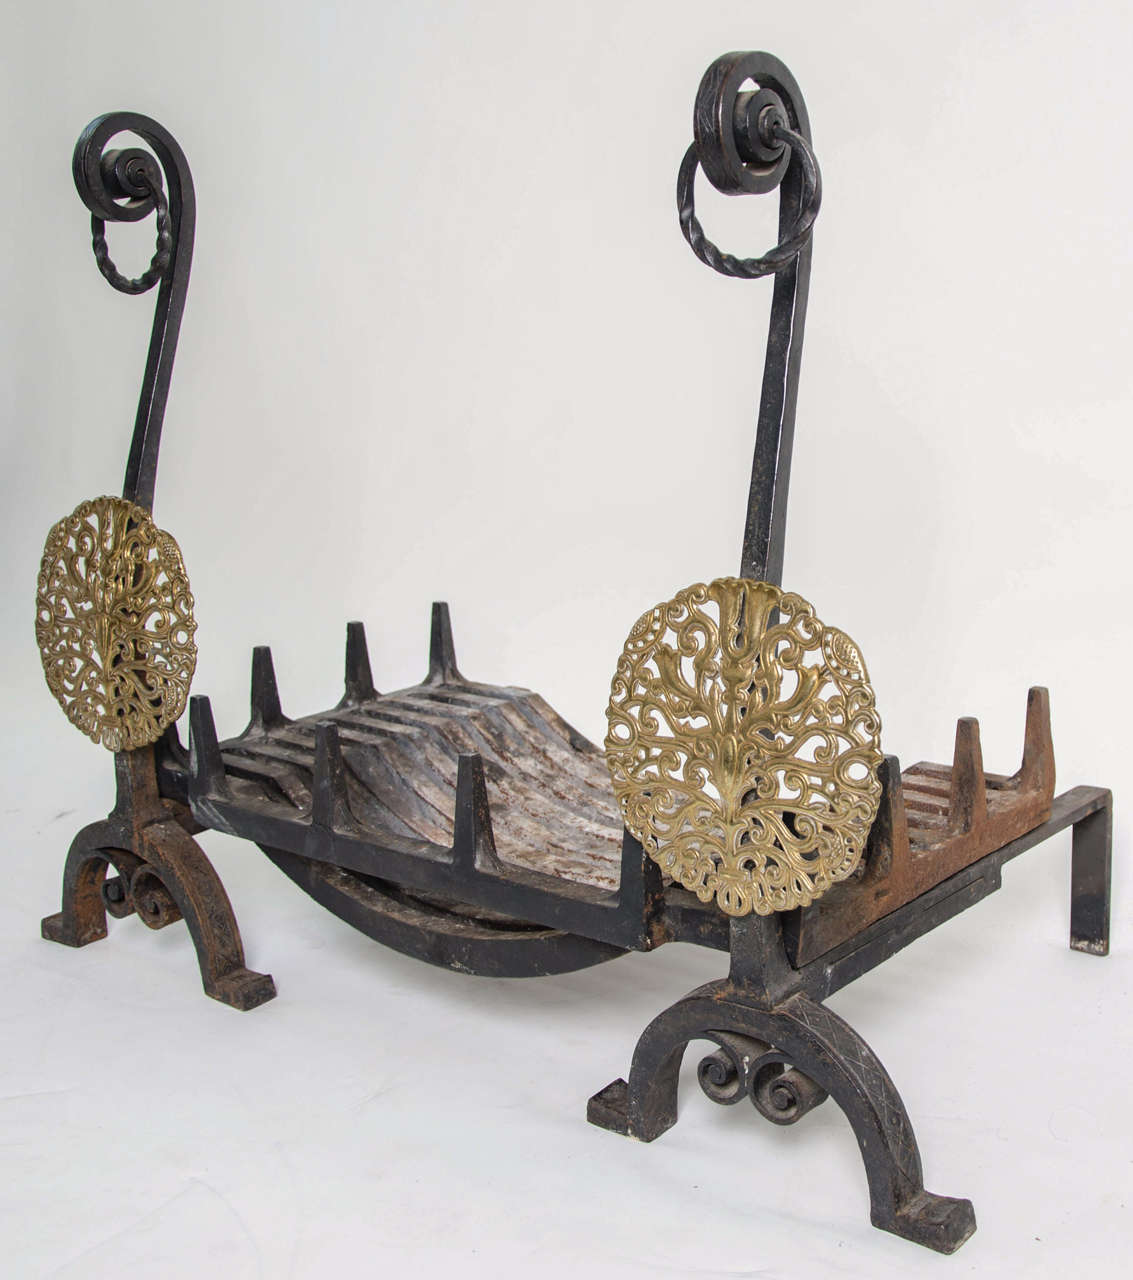 A large and refined pair of English Arts & Crafts andirons in wrought iron and bronze, supporting a matching grate.  
The wrought iron is beautifully decorated with geometrical patterns.